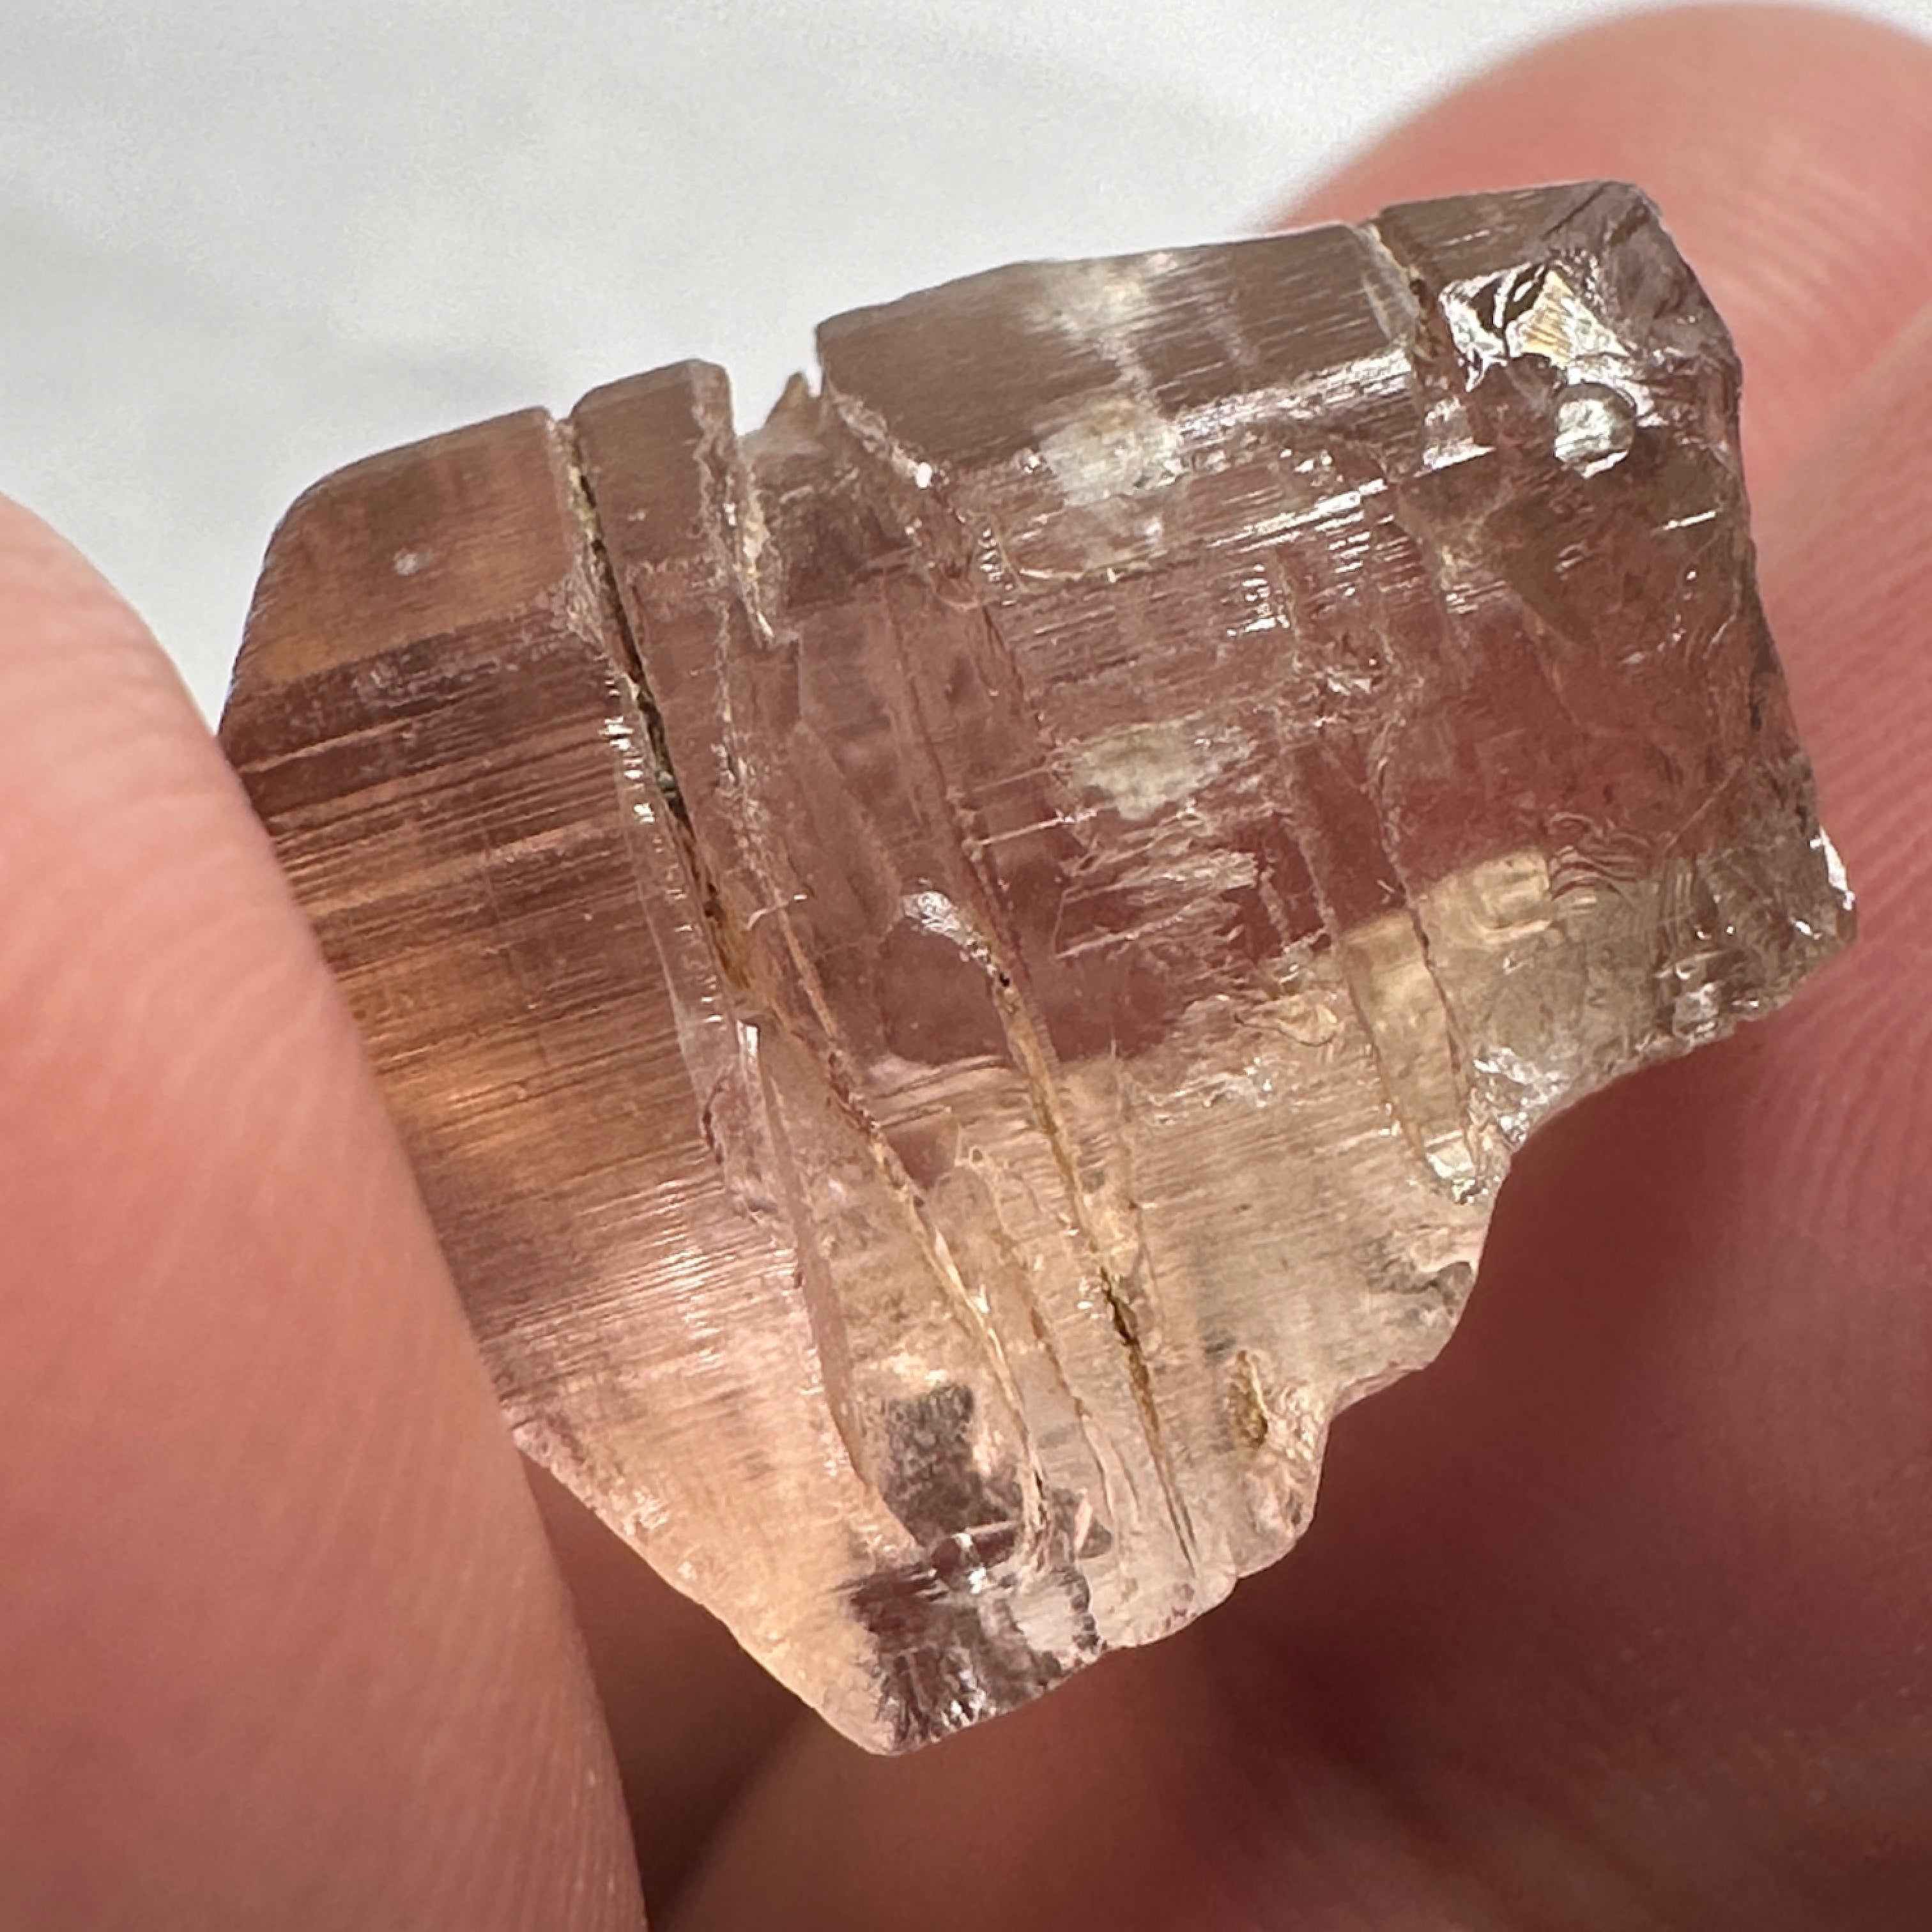 23.82ct Very Rare, Peach Pink Scapolite, Tanzania, Untreated Unheated, VVS-IF (flawless)